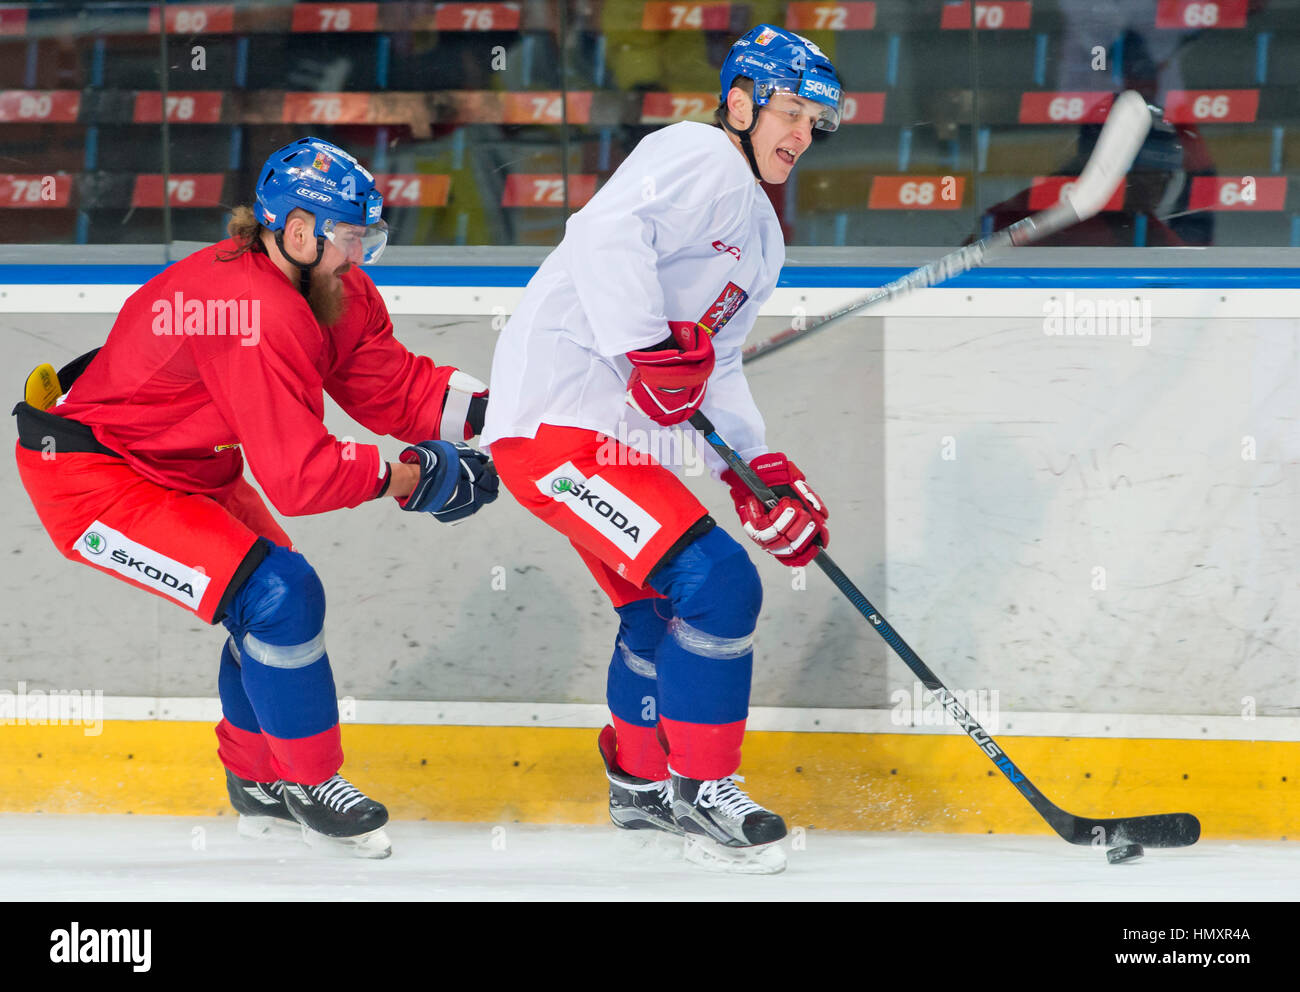 Prague, Czech Republic. 07th Feb, 2017. The Czech national ice-hockey team's players Lukas Kaspar and Lukas Radil in action during the training session prior to the February Sweden Games in Gothenburg in Prague, Czech Republic, February 7, 2017. Sweden Games, the third part of the European Hockey Tour (EHT) series, will take place on February 9-12. Credit: Vit Simanek/CTK Photo/Alamy Live News Stock Photo